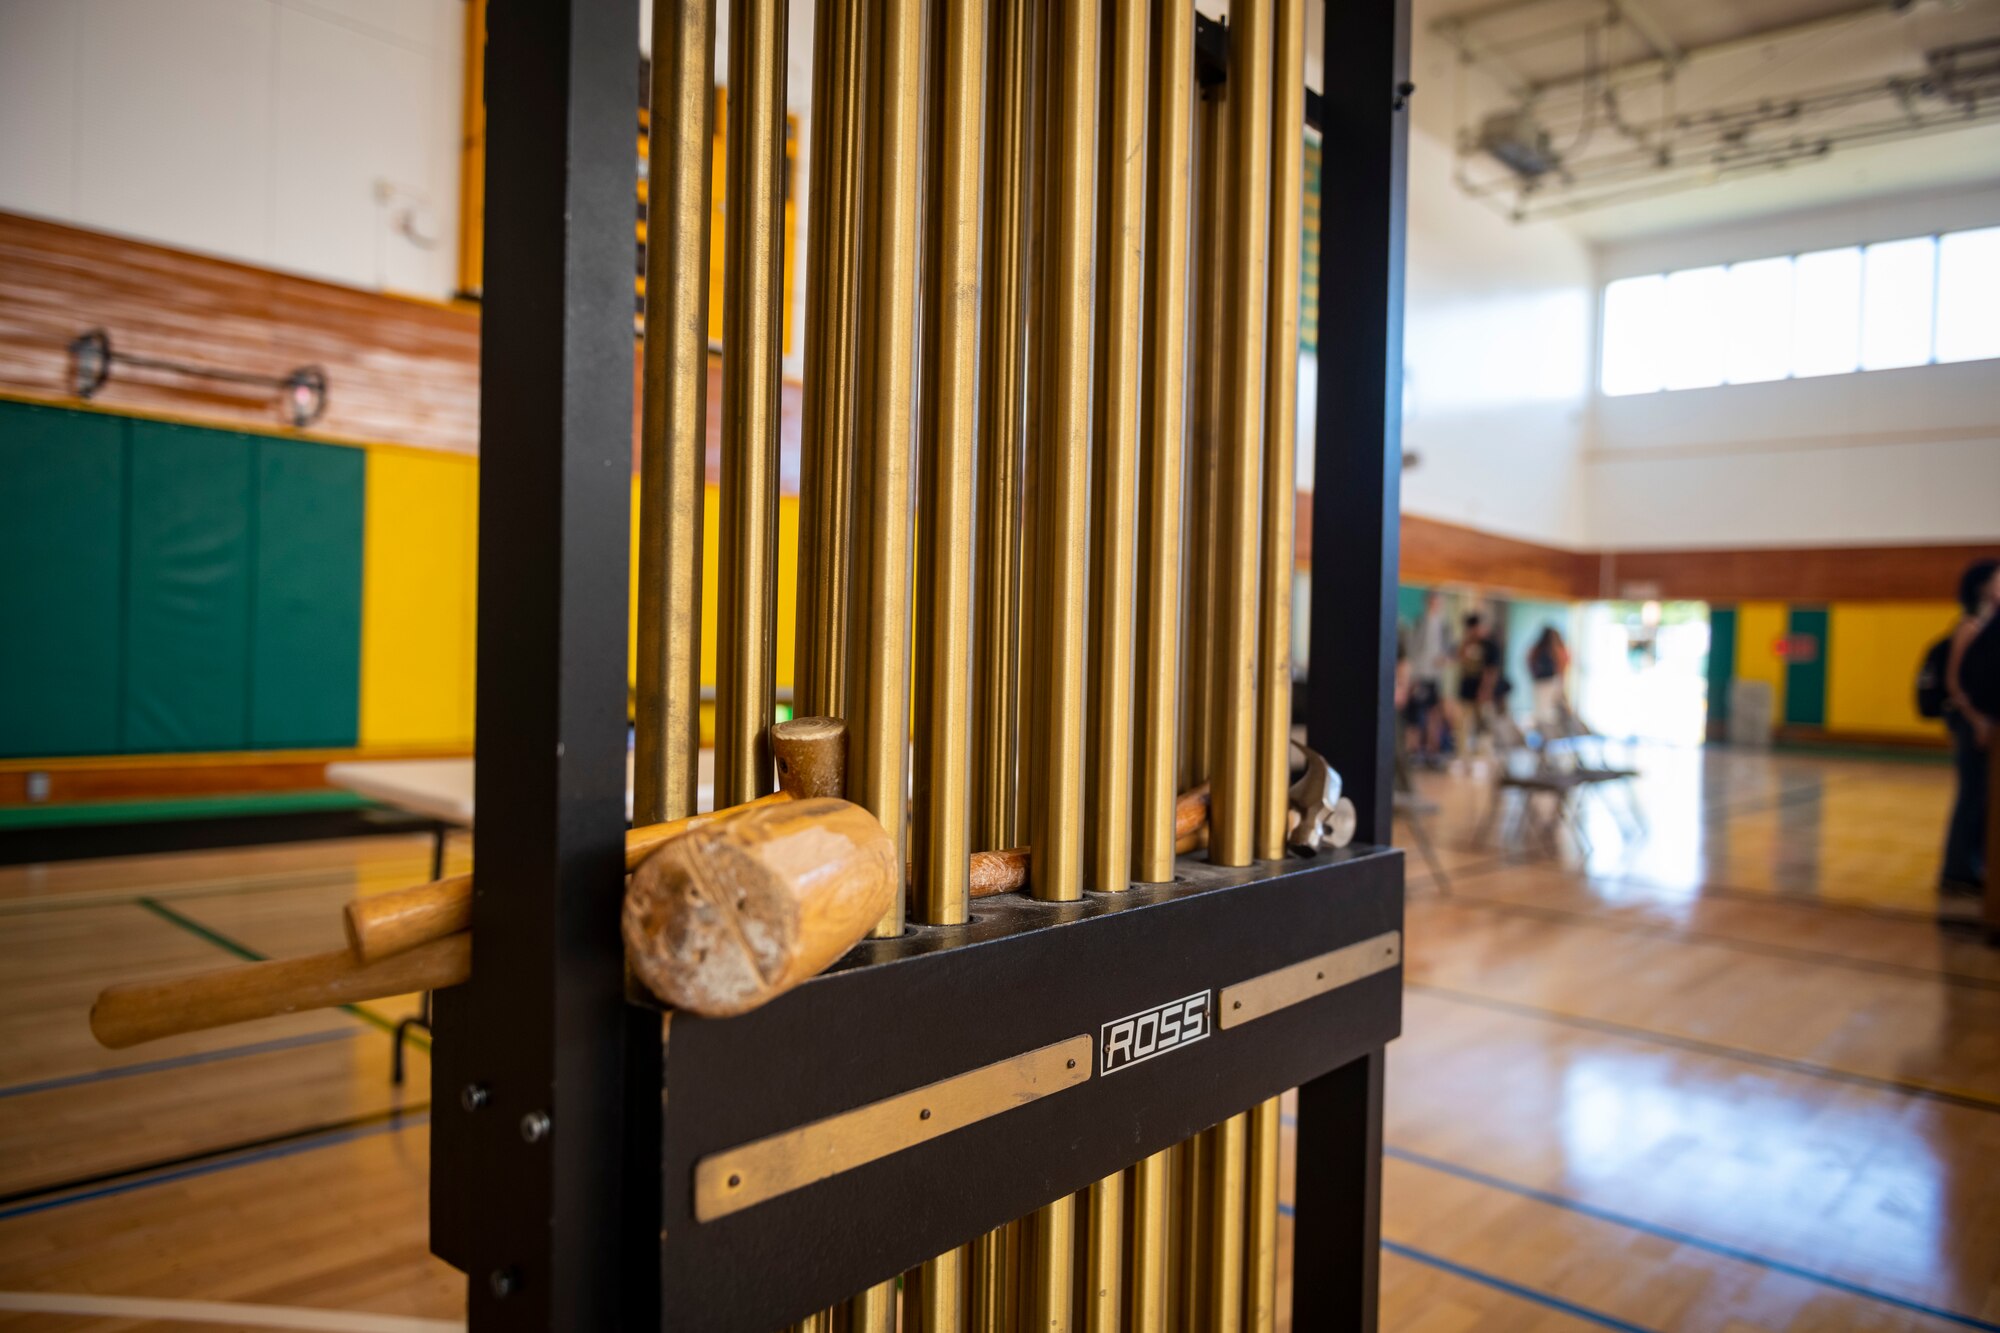 A set of mallets and tubular bells instrument sit in a gym